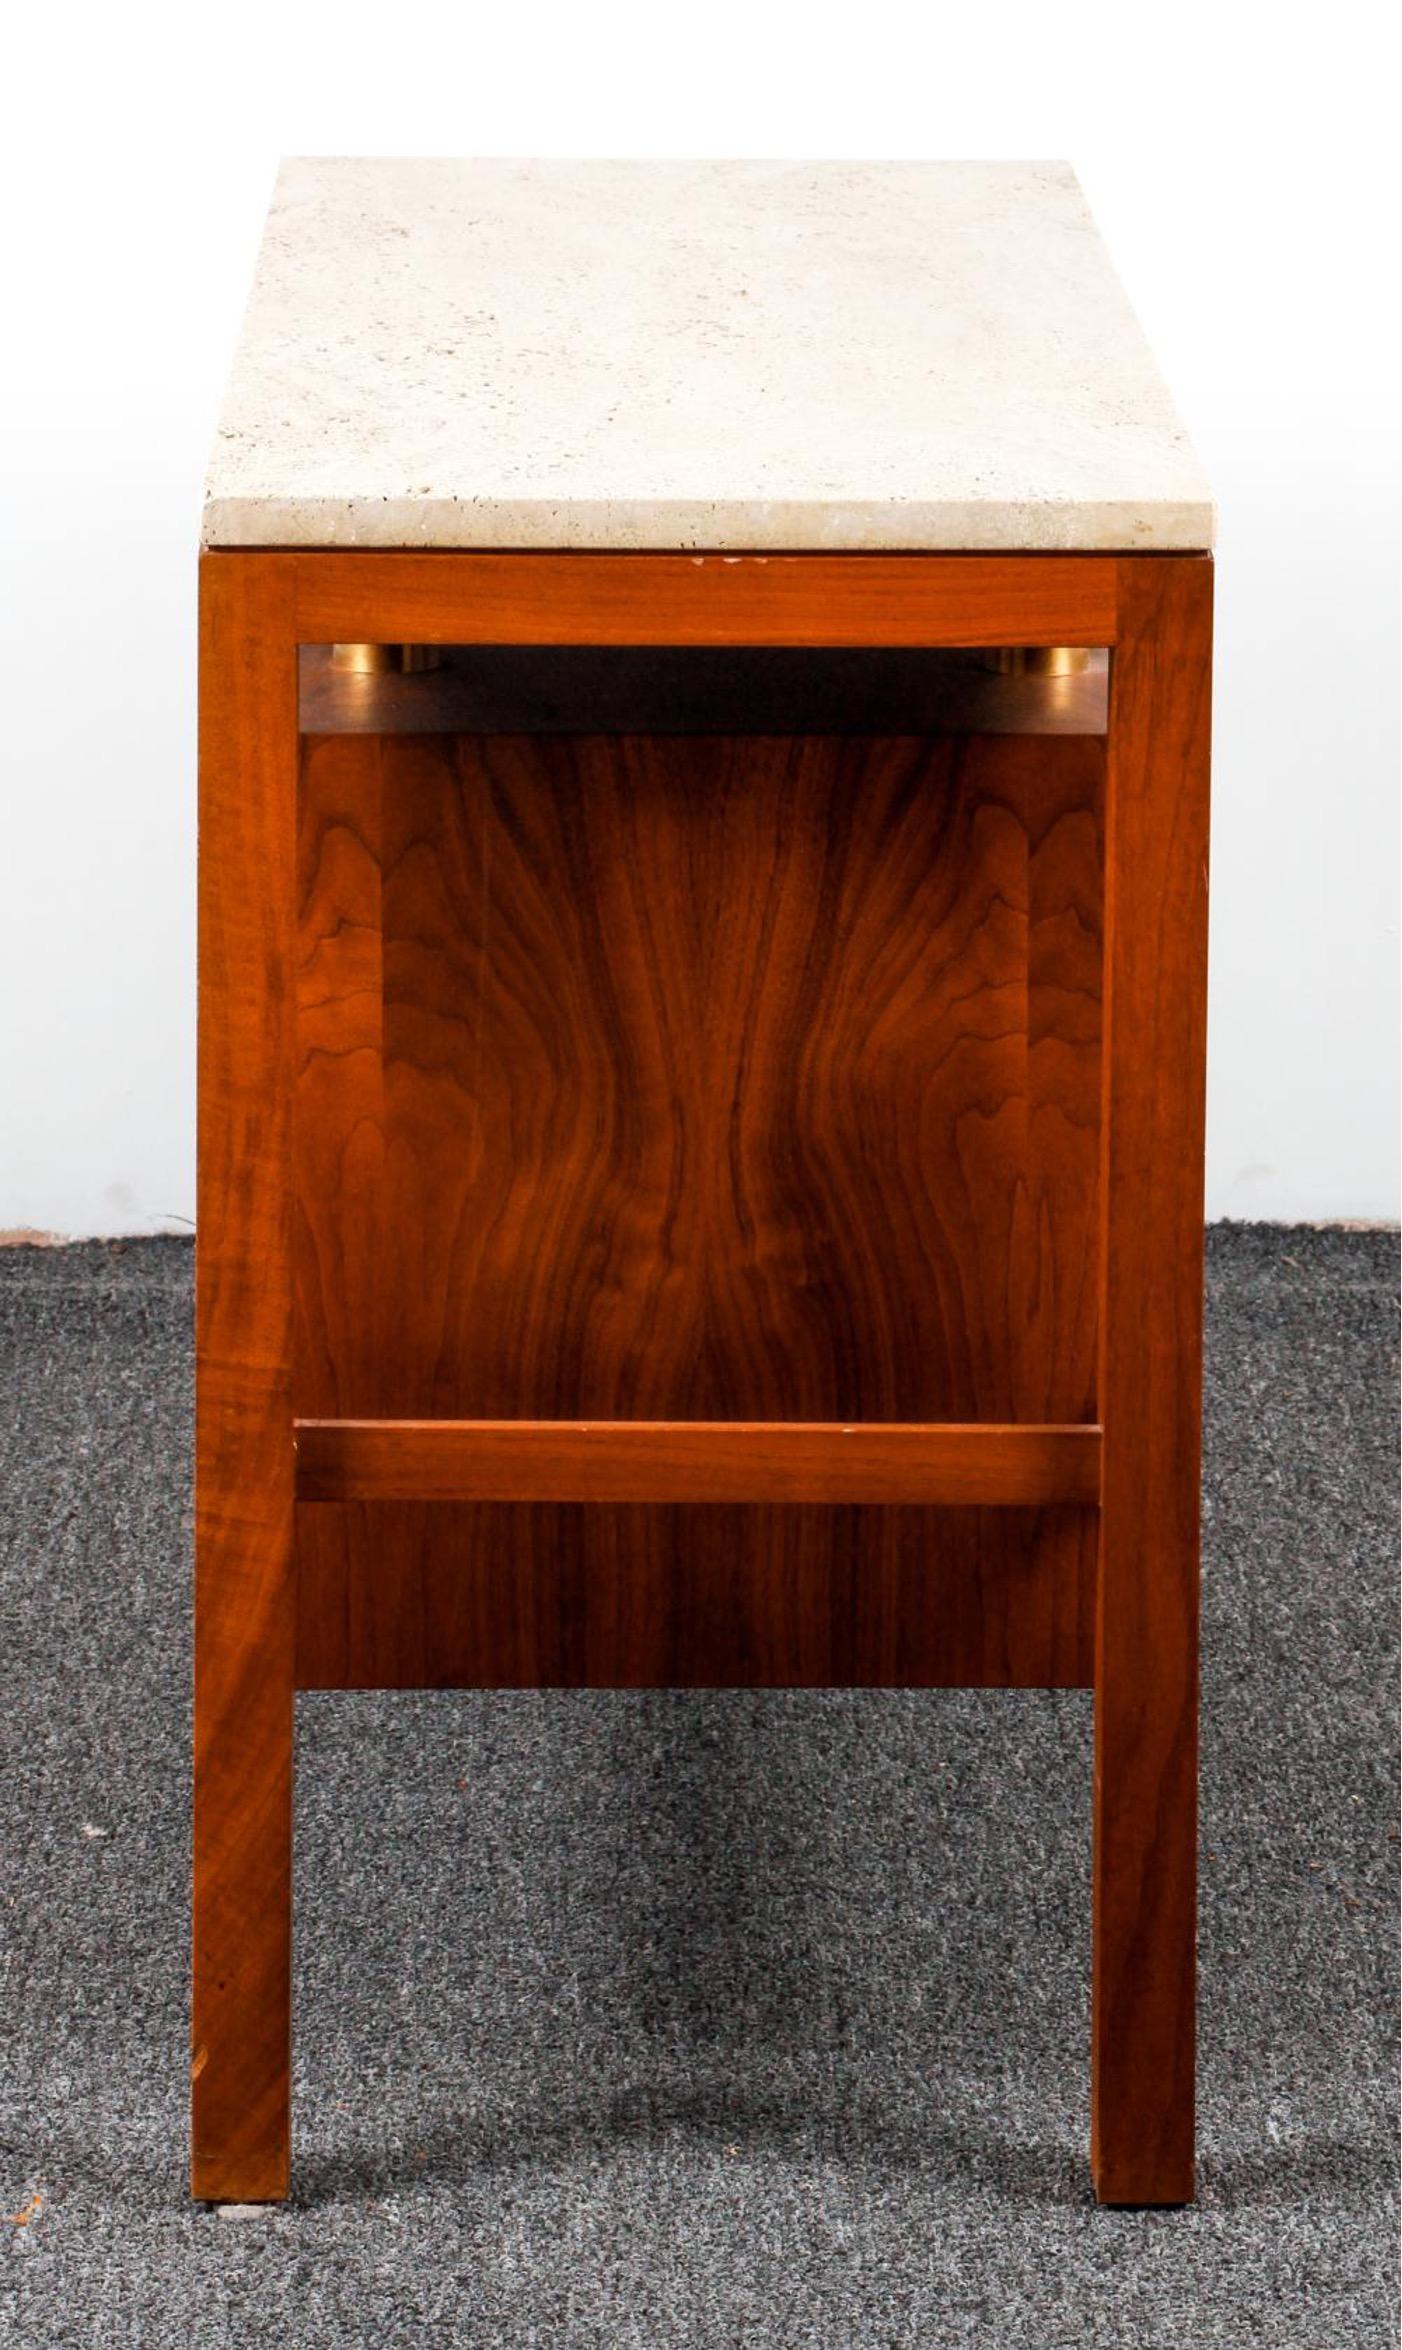 Mid-Century Modern Sideboards / Cabinets by, Vladimir Kagan in 1961. For Sale 2